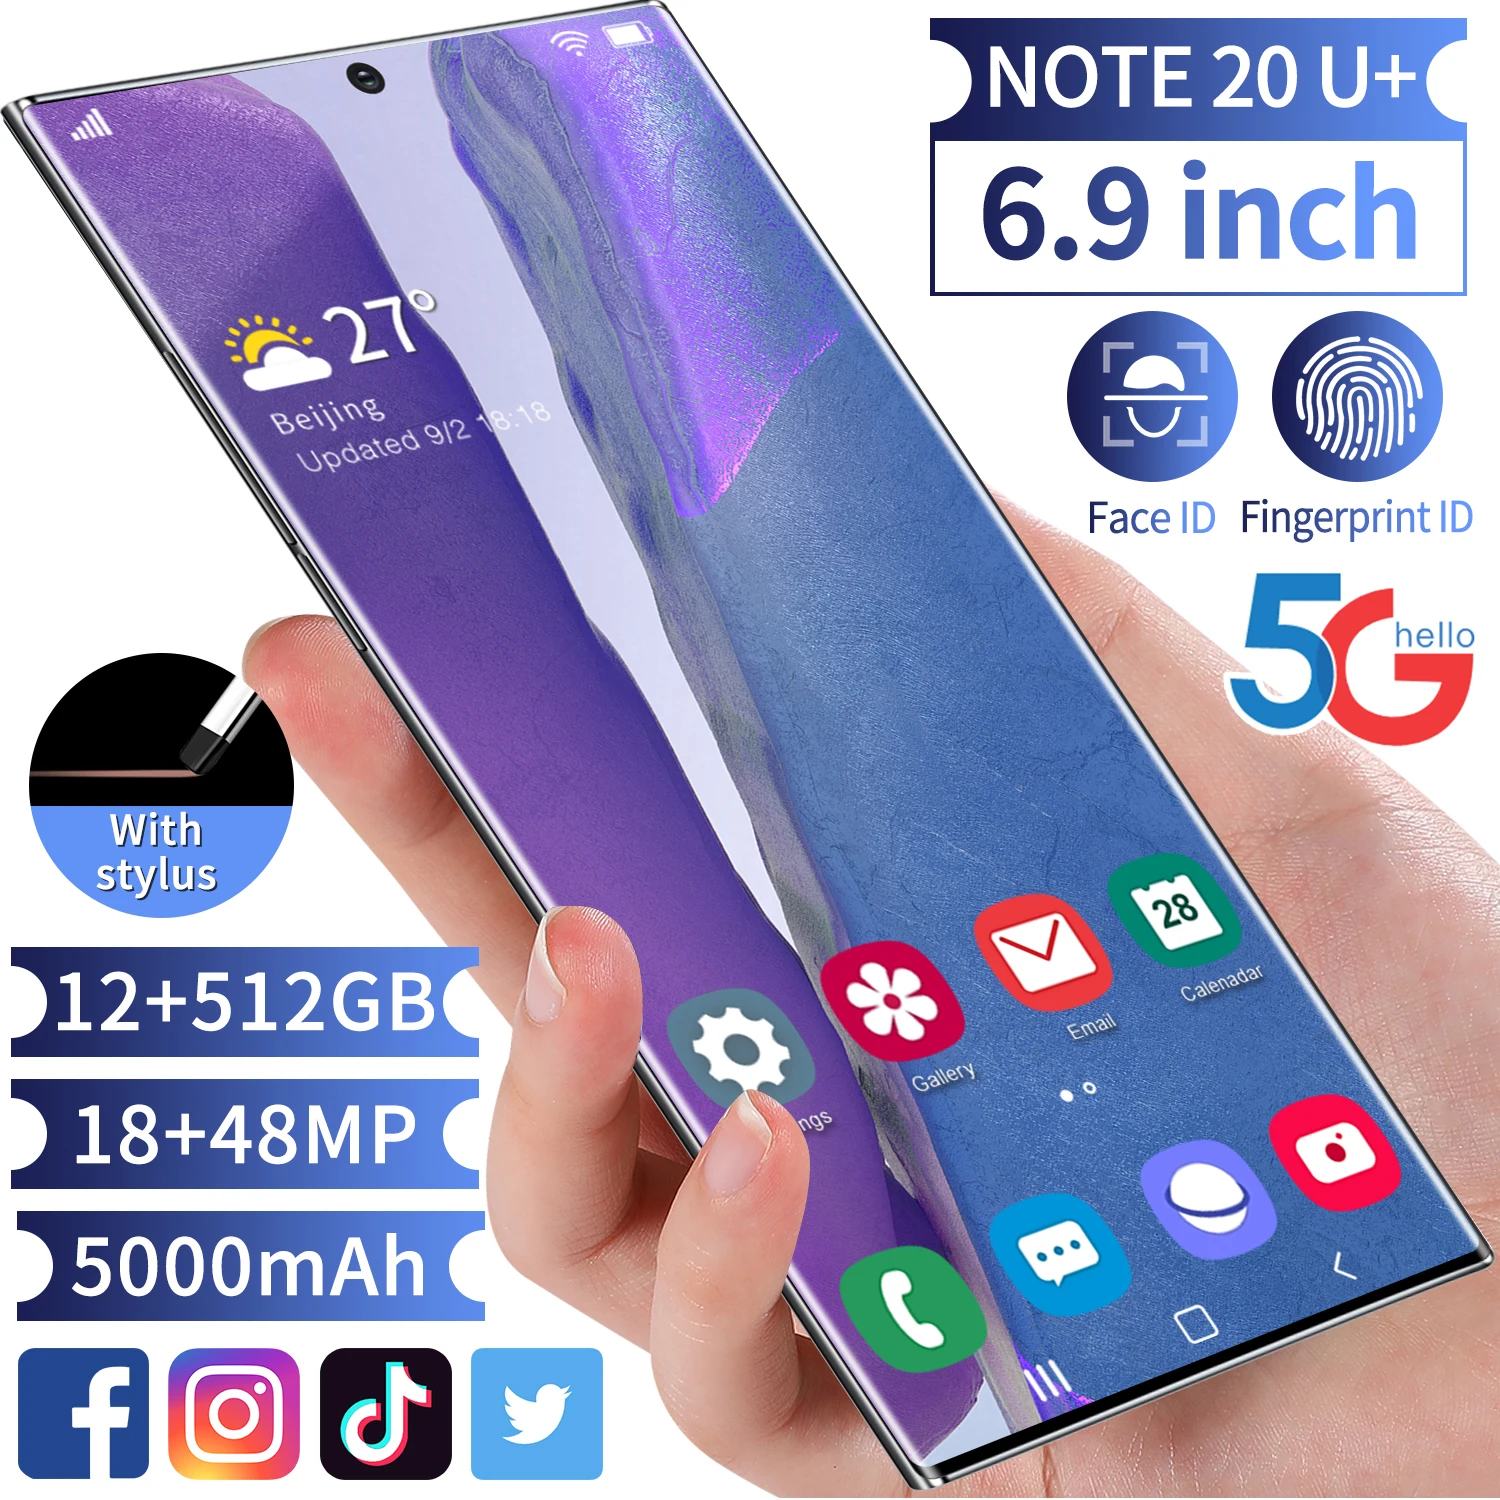 

2021 Wholesale Smartphone 6.9Inch AMOLED Screen Note 20U+ Android 10.0 Telephone 12GB+512GB Smartphone With Face Unlock